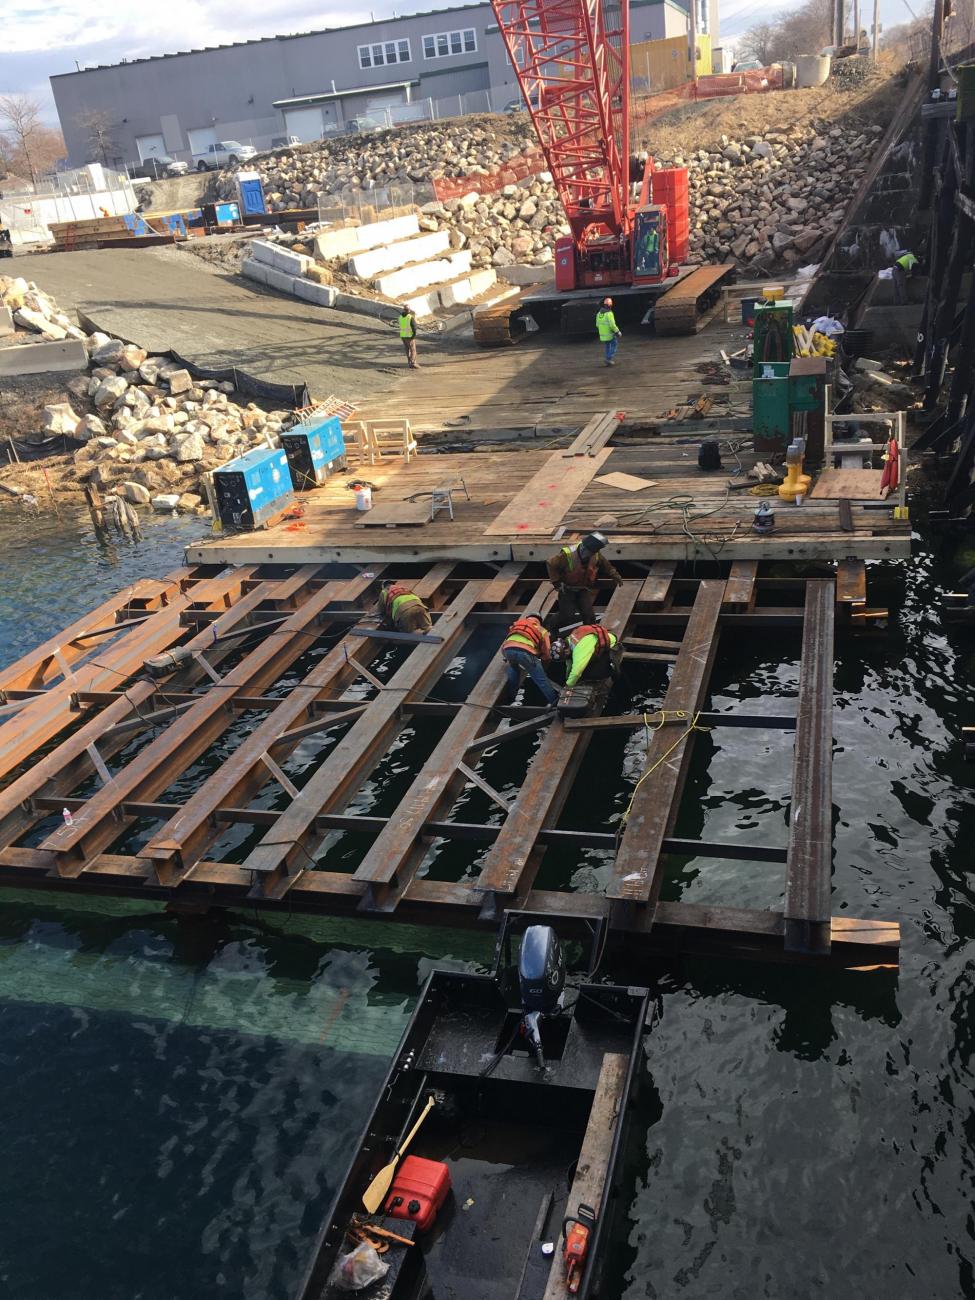 Crew members work to Install a temporary work platform, as part of Gloucester Drawbridge Replacement construction